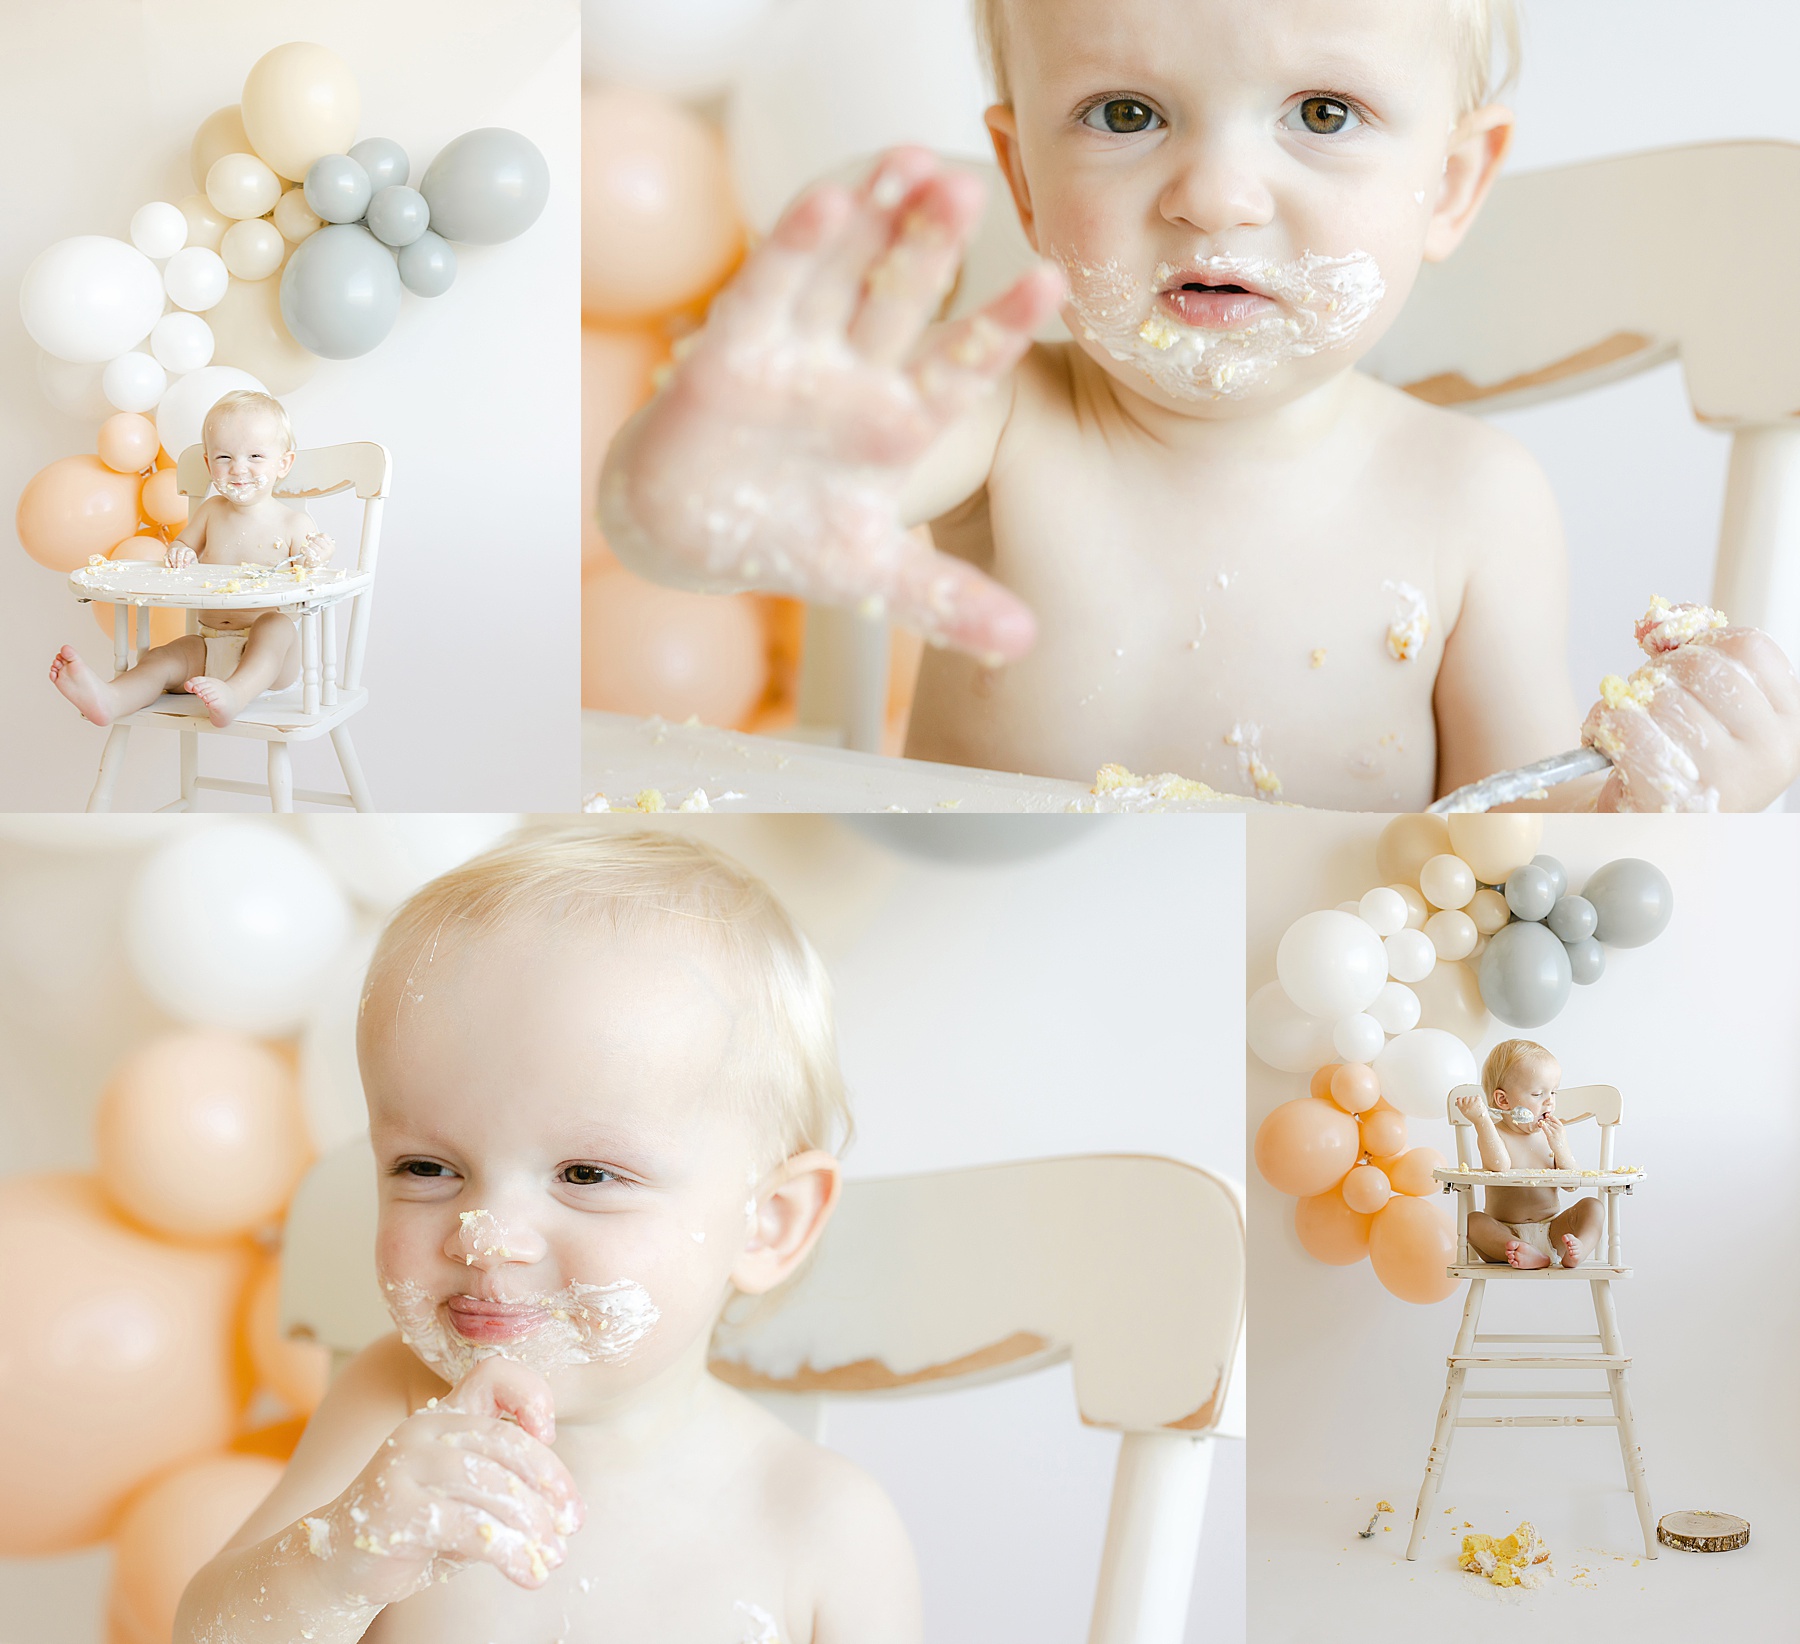 baby boy eating white cake in a white high chair with balloons in the background